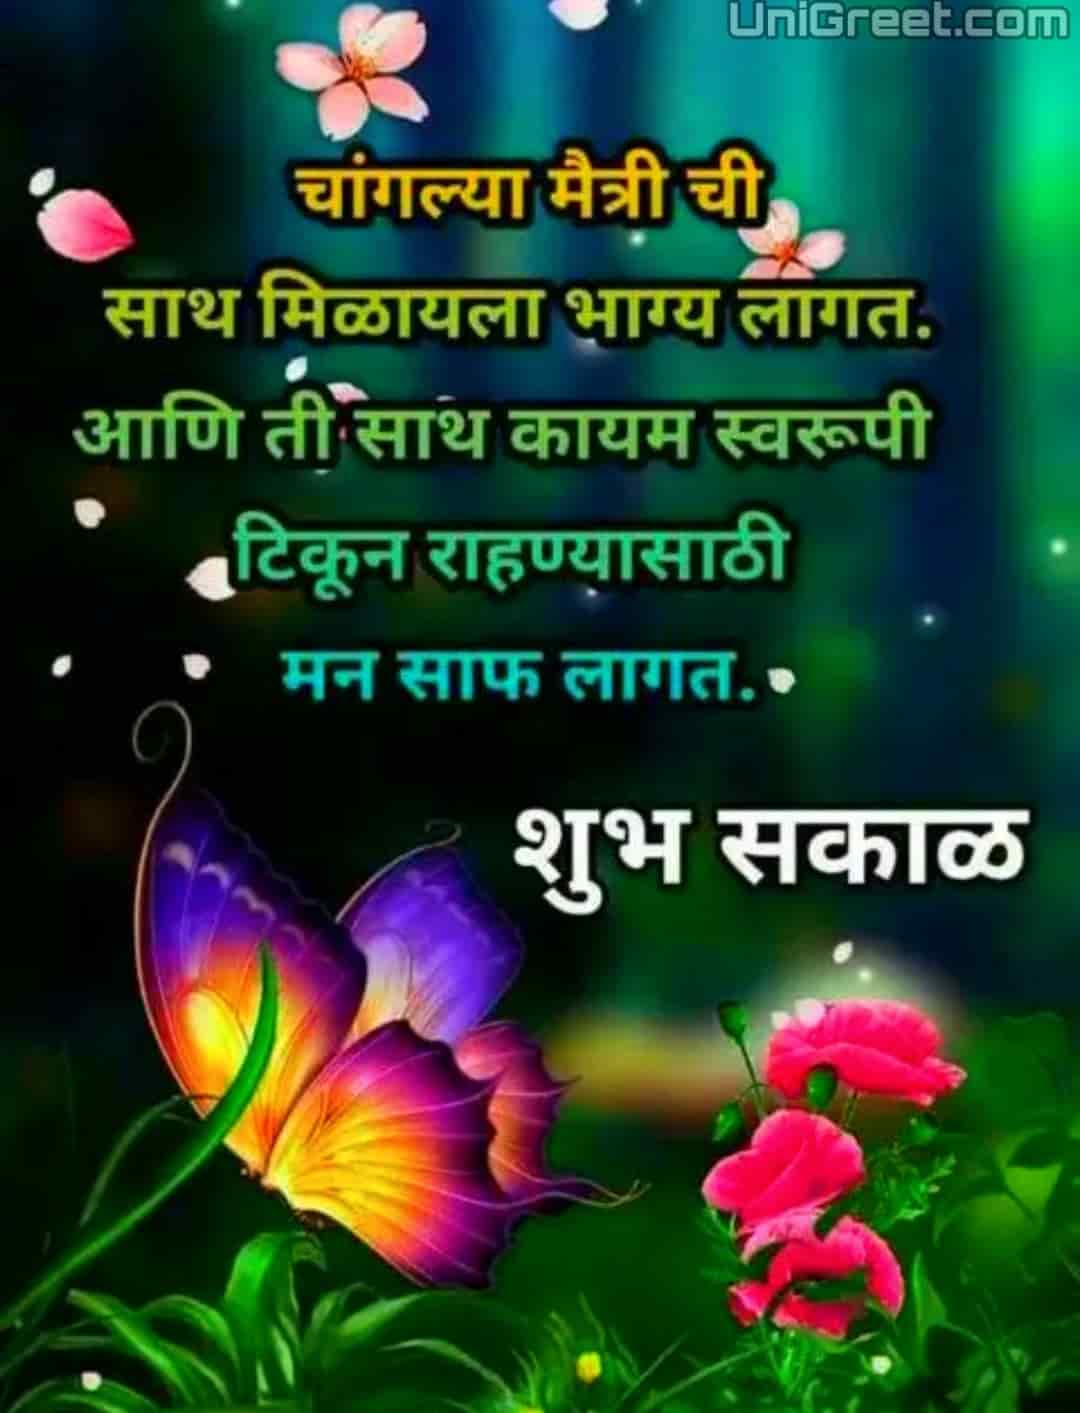 100+ शुभ सकाळ मराठी शुभेच्छा | Good Morning Wishes Images Quotes Status ...